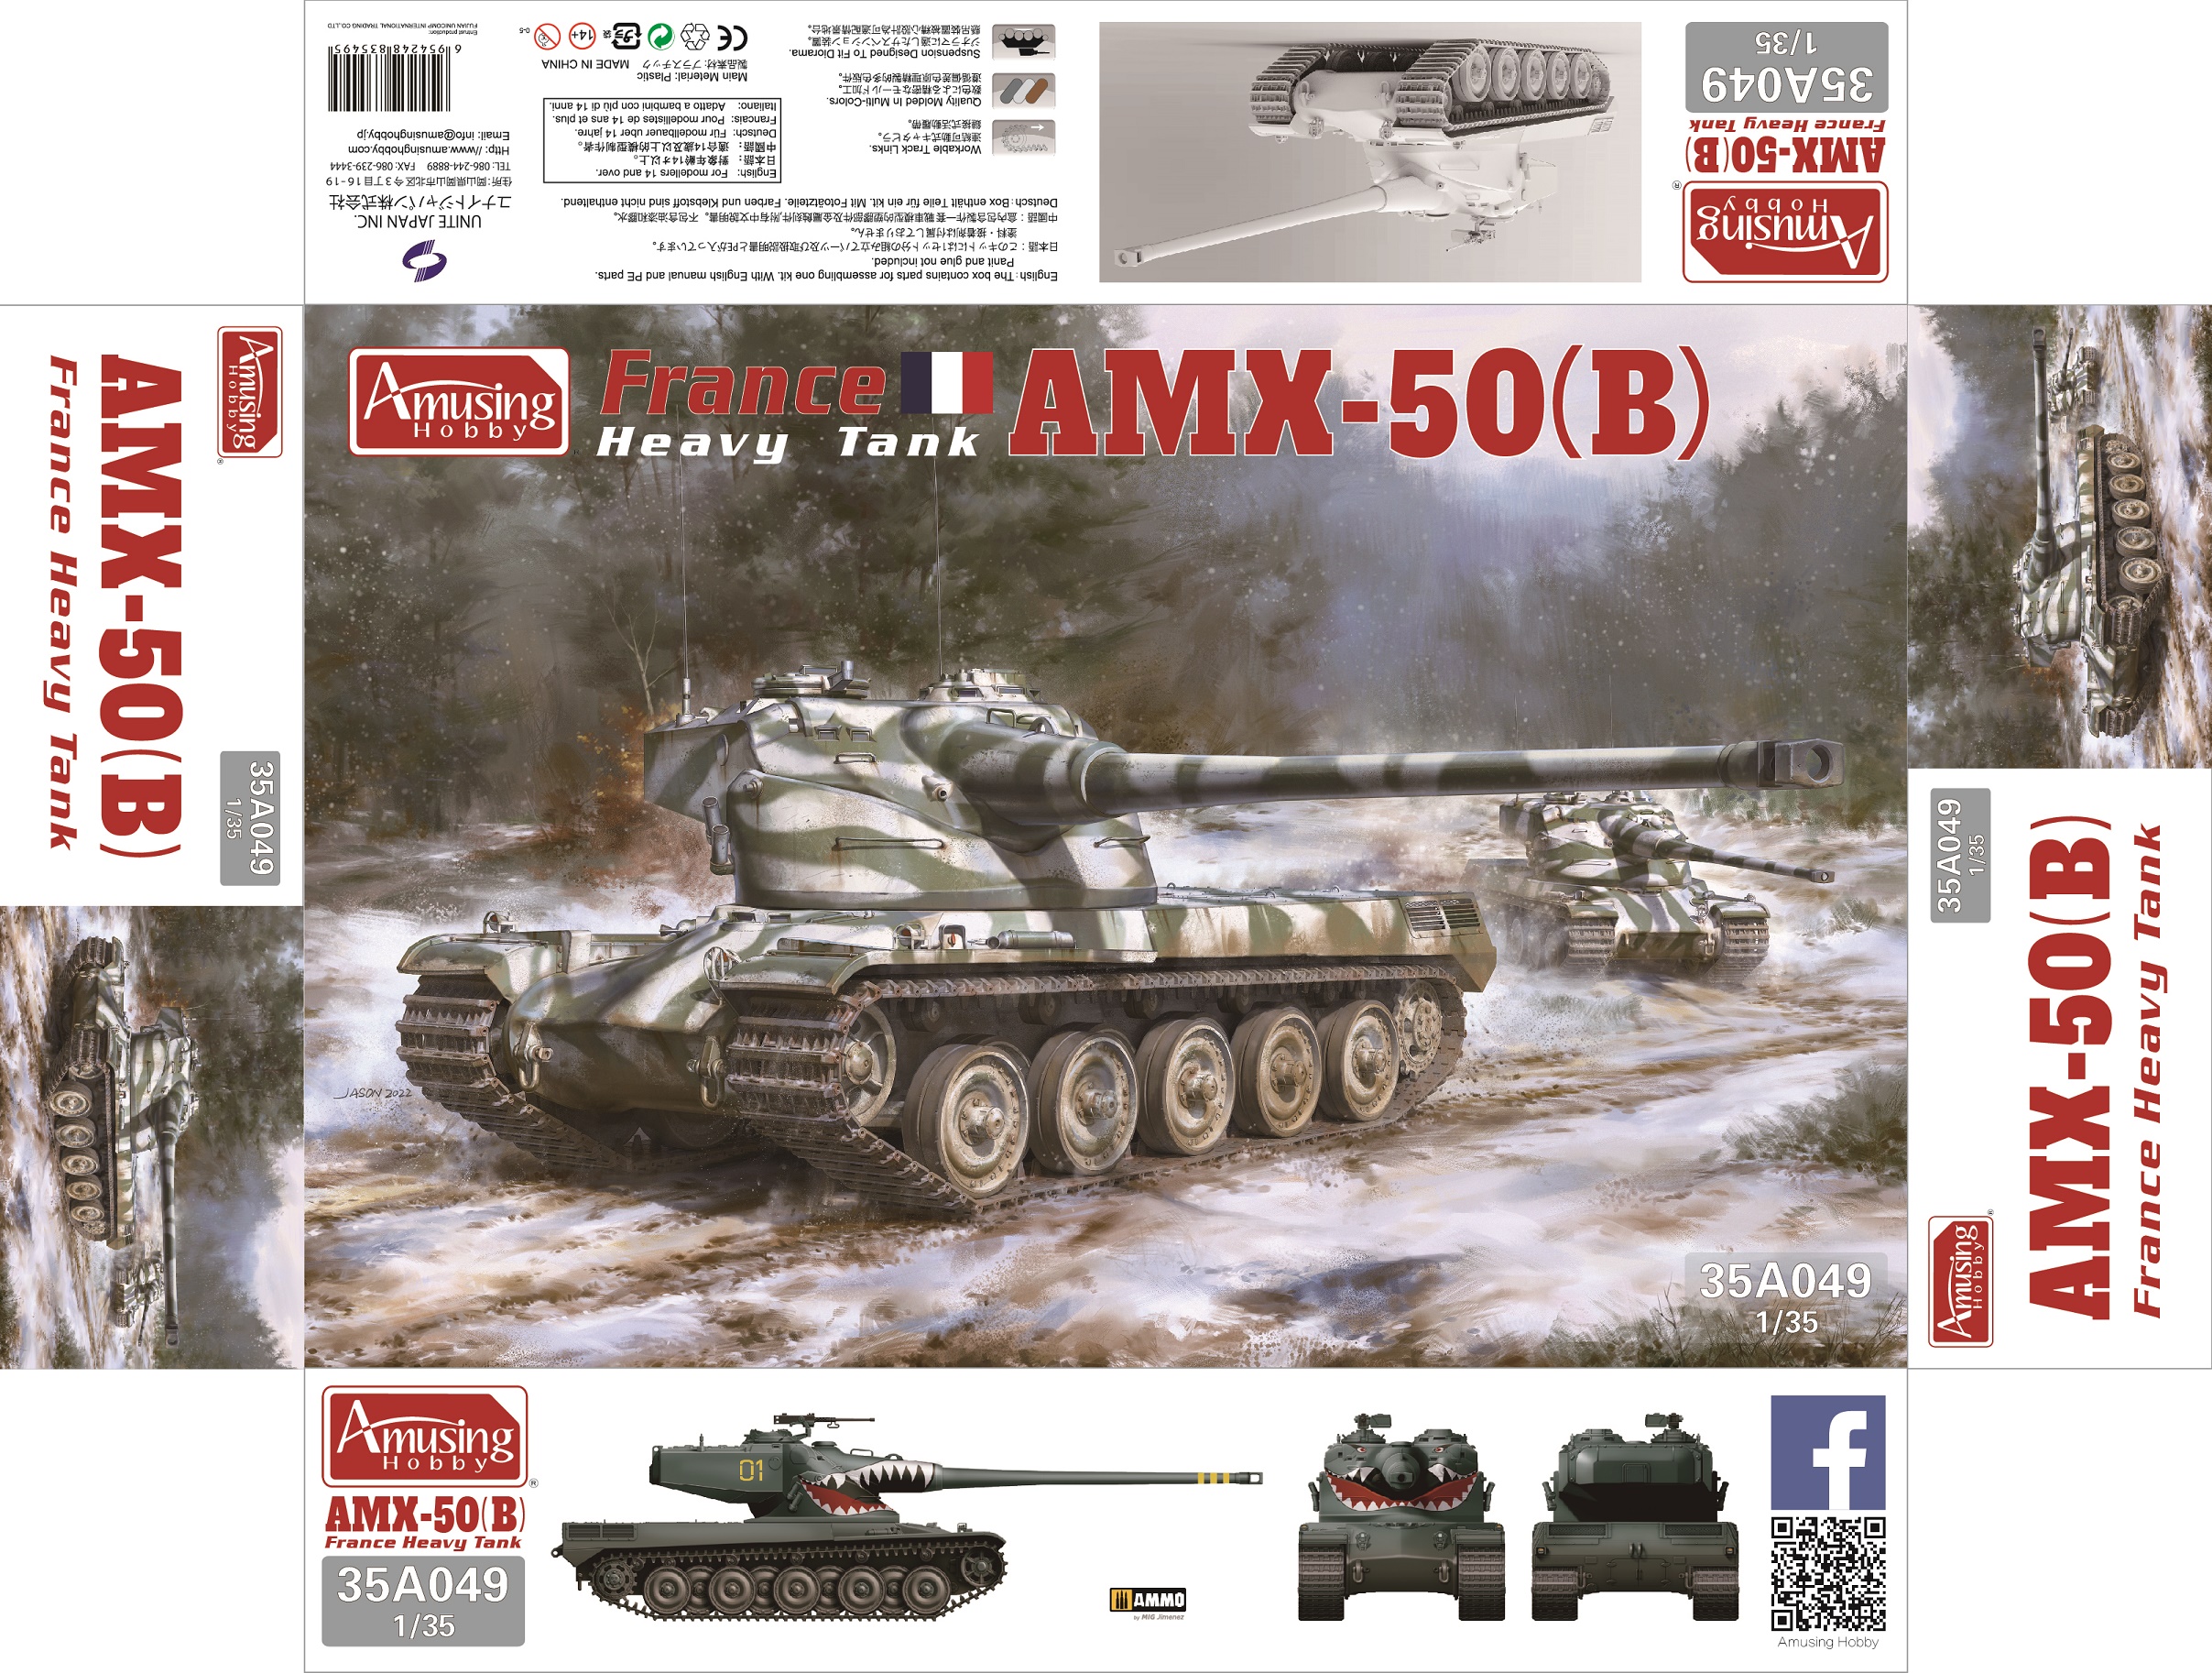 AH35A049 Amusing Hobby AMX-50(B) French Heavy Tank. Includes link-and-length tracks